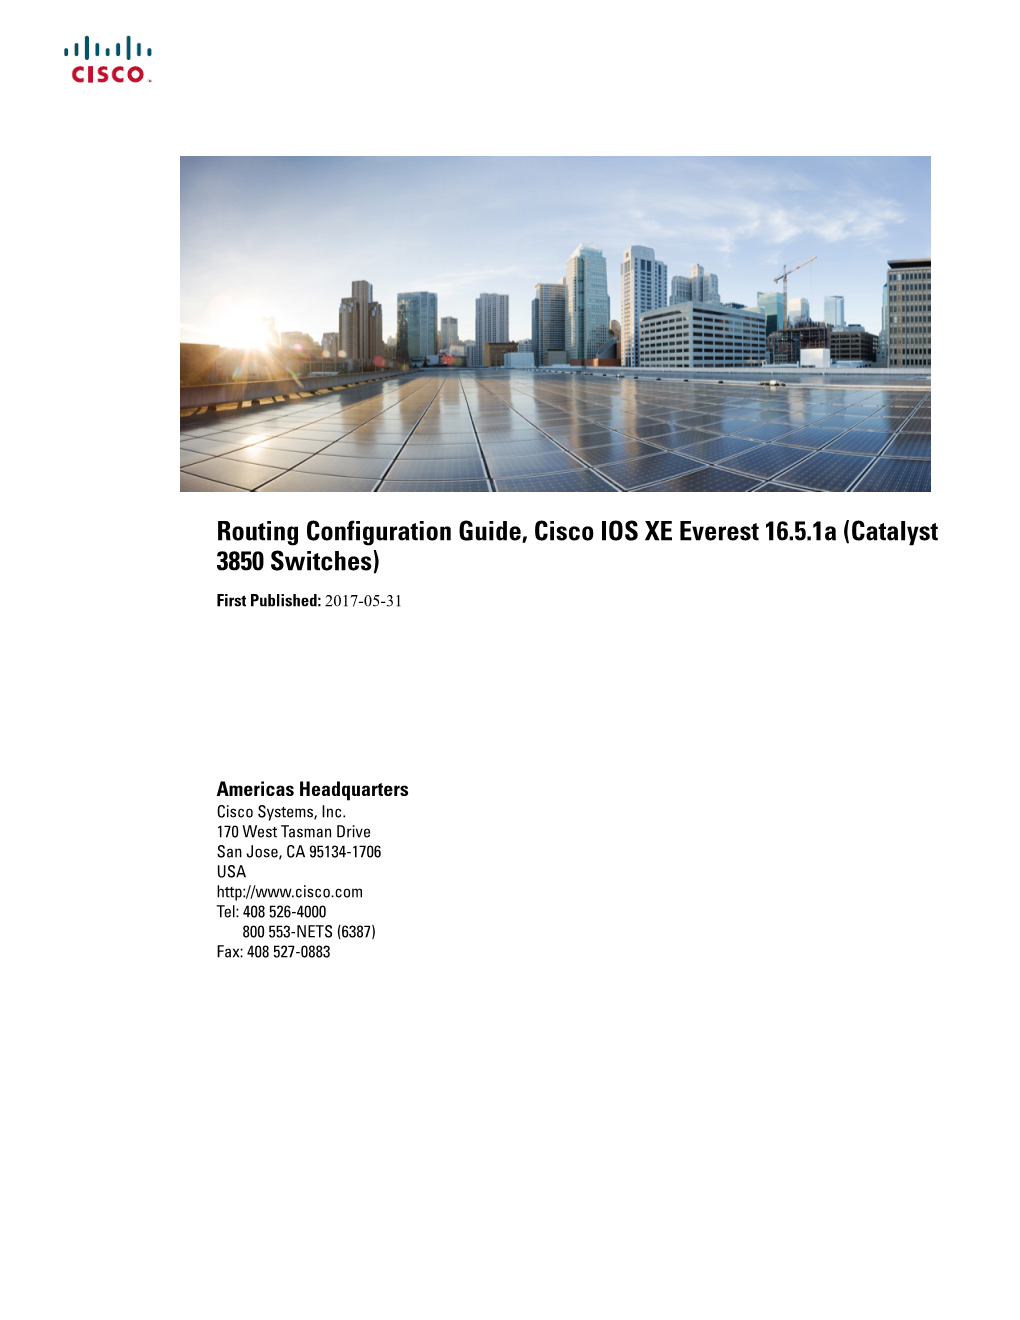 Routing Configuration Guide, Cisco IOS XE Everest 16.5.1A (Catalyst 3850 Switches)